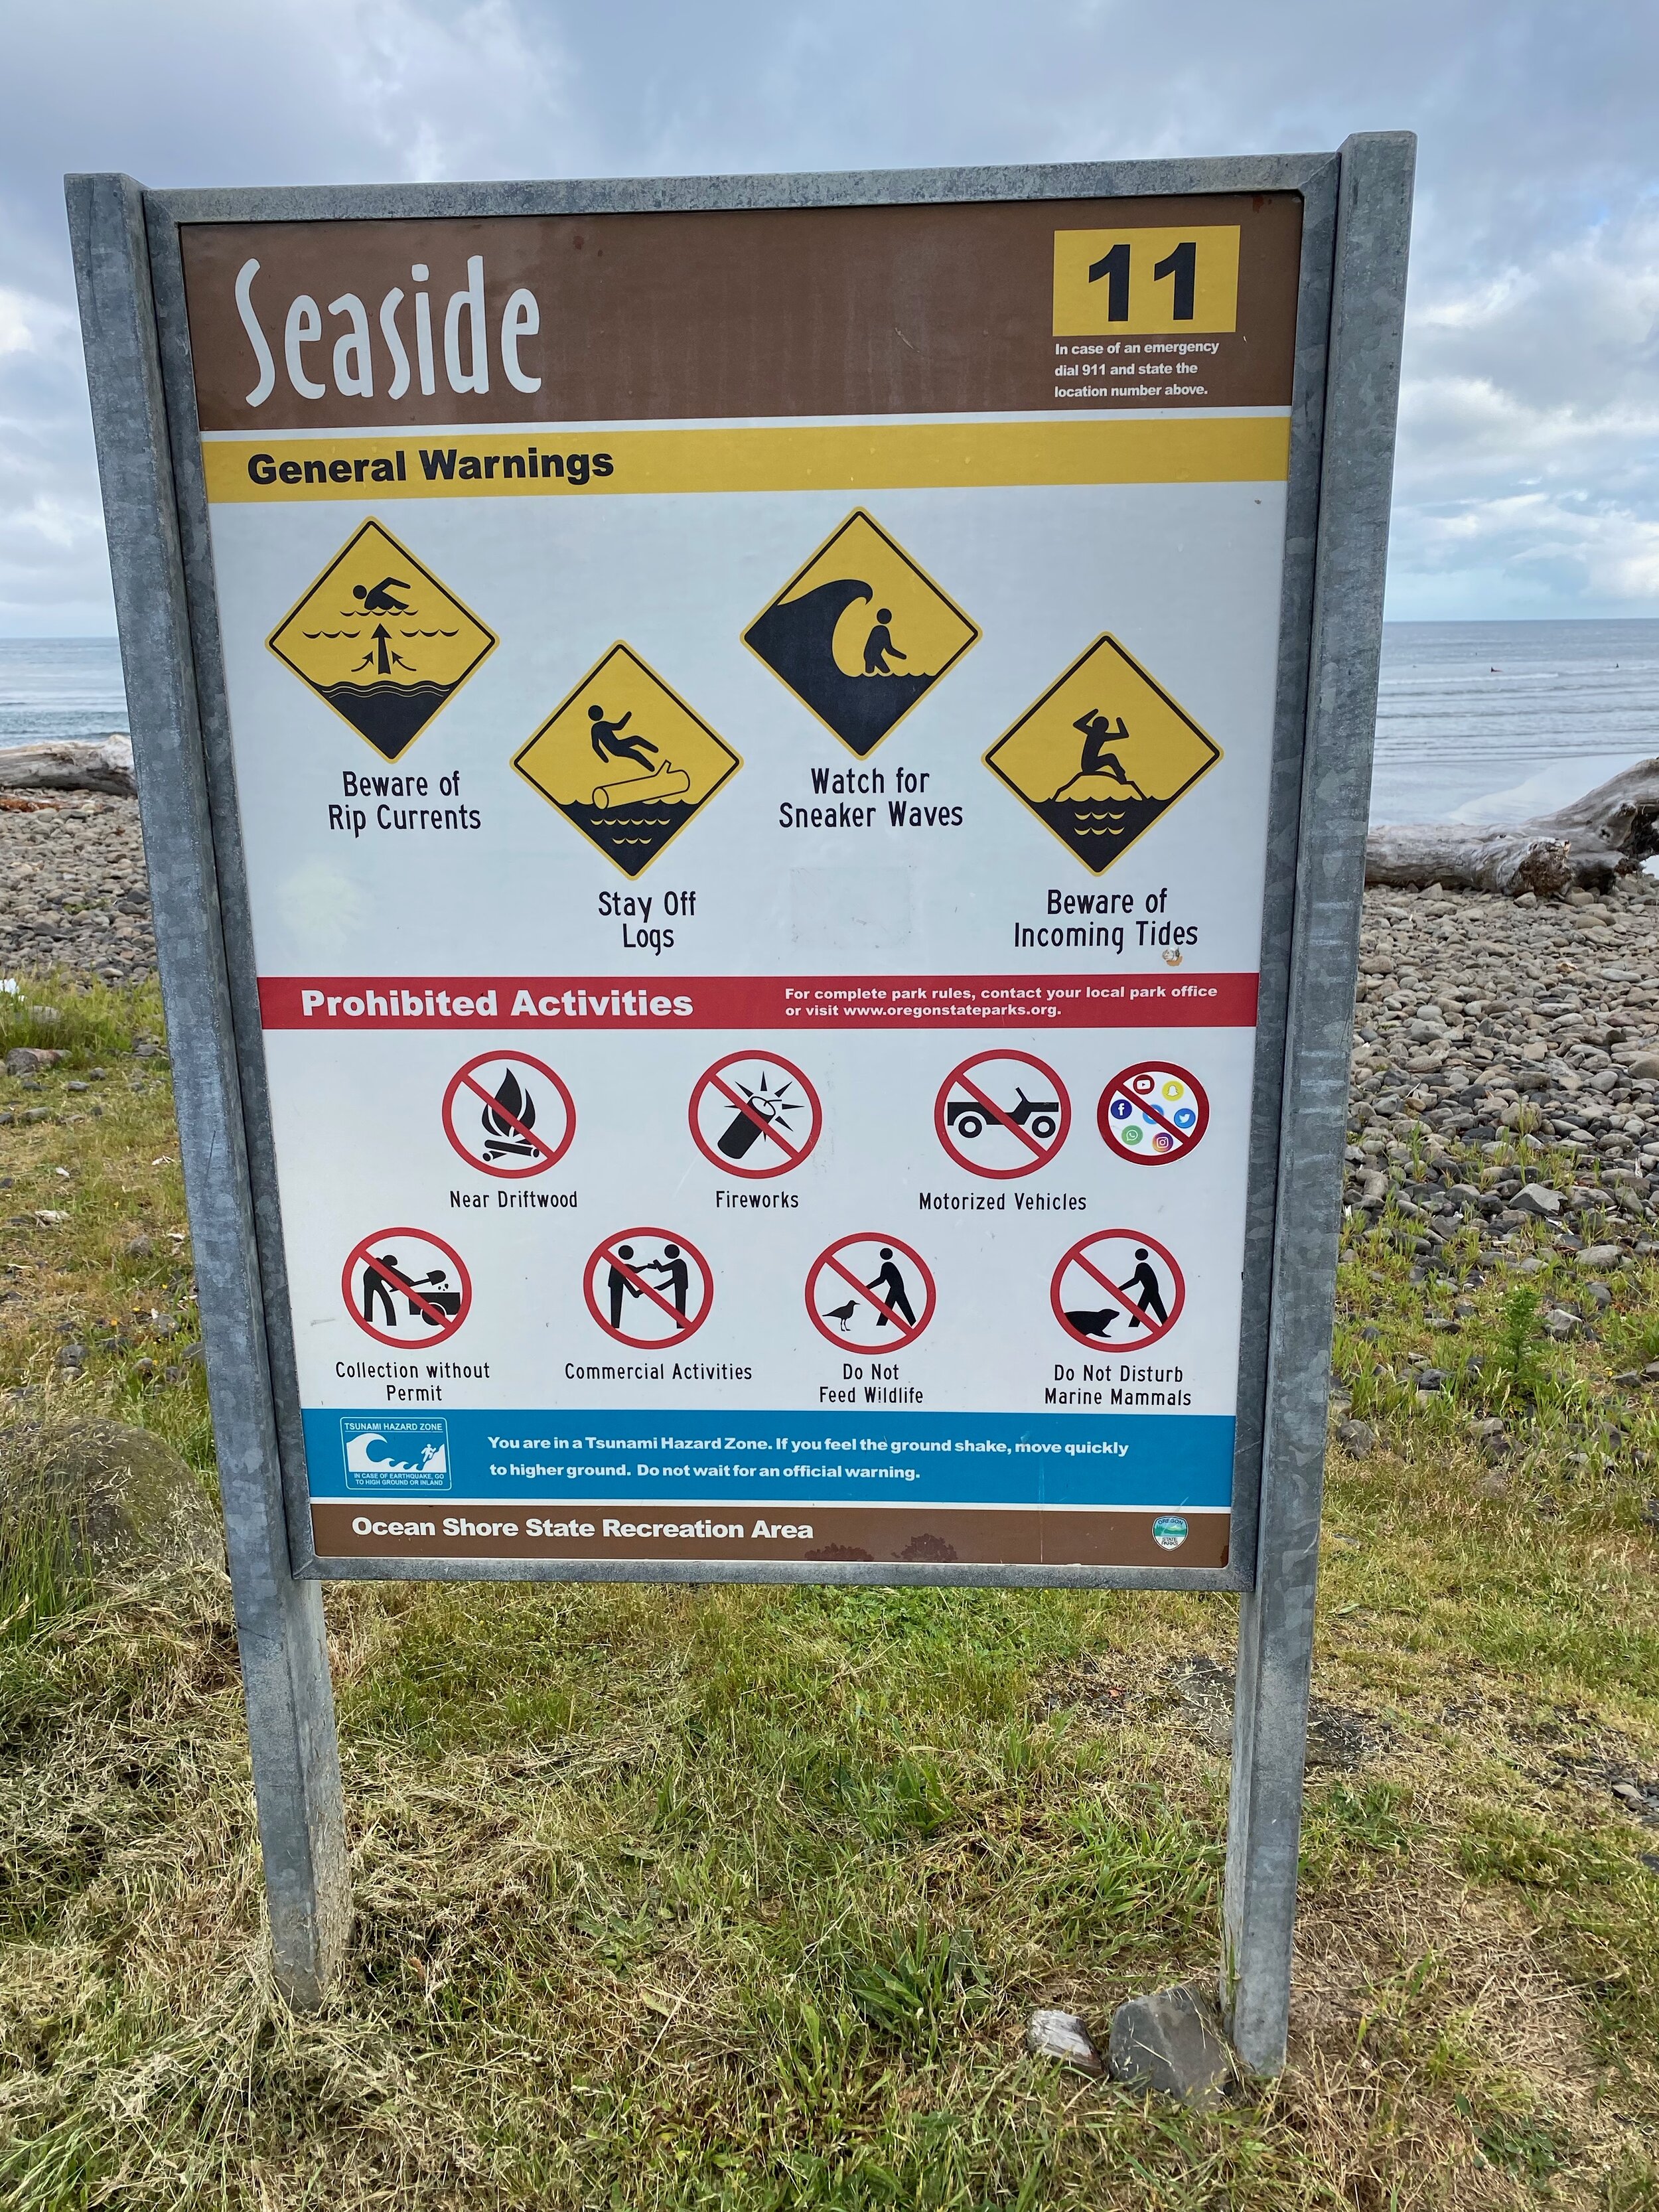 Great warning signs at beaches along the ocean, a bit different from the Gulf of Mexico beaches we are used to.  (All photos here taken by Karen Boudreaux, June 15, 2021)